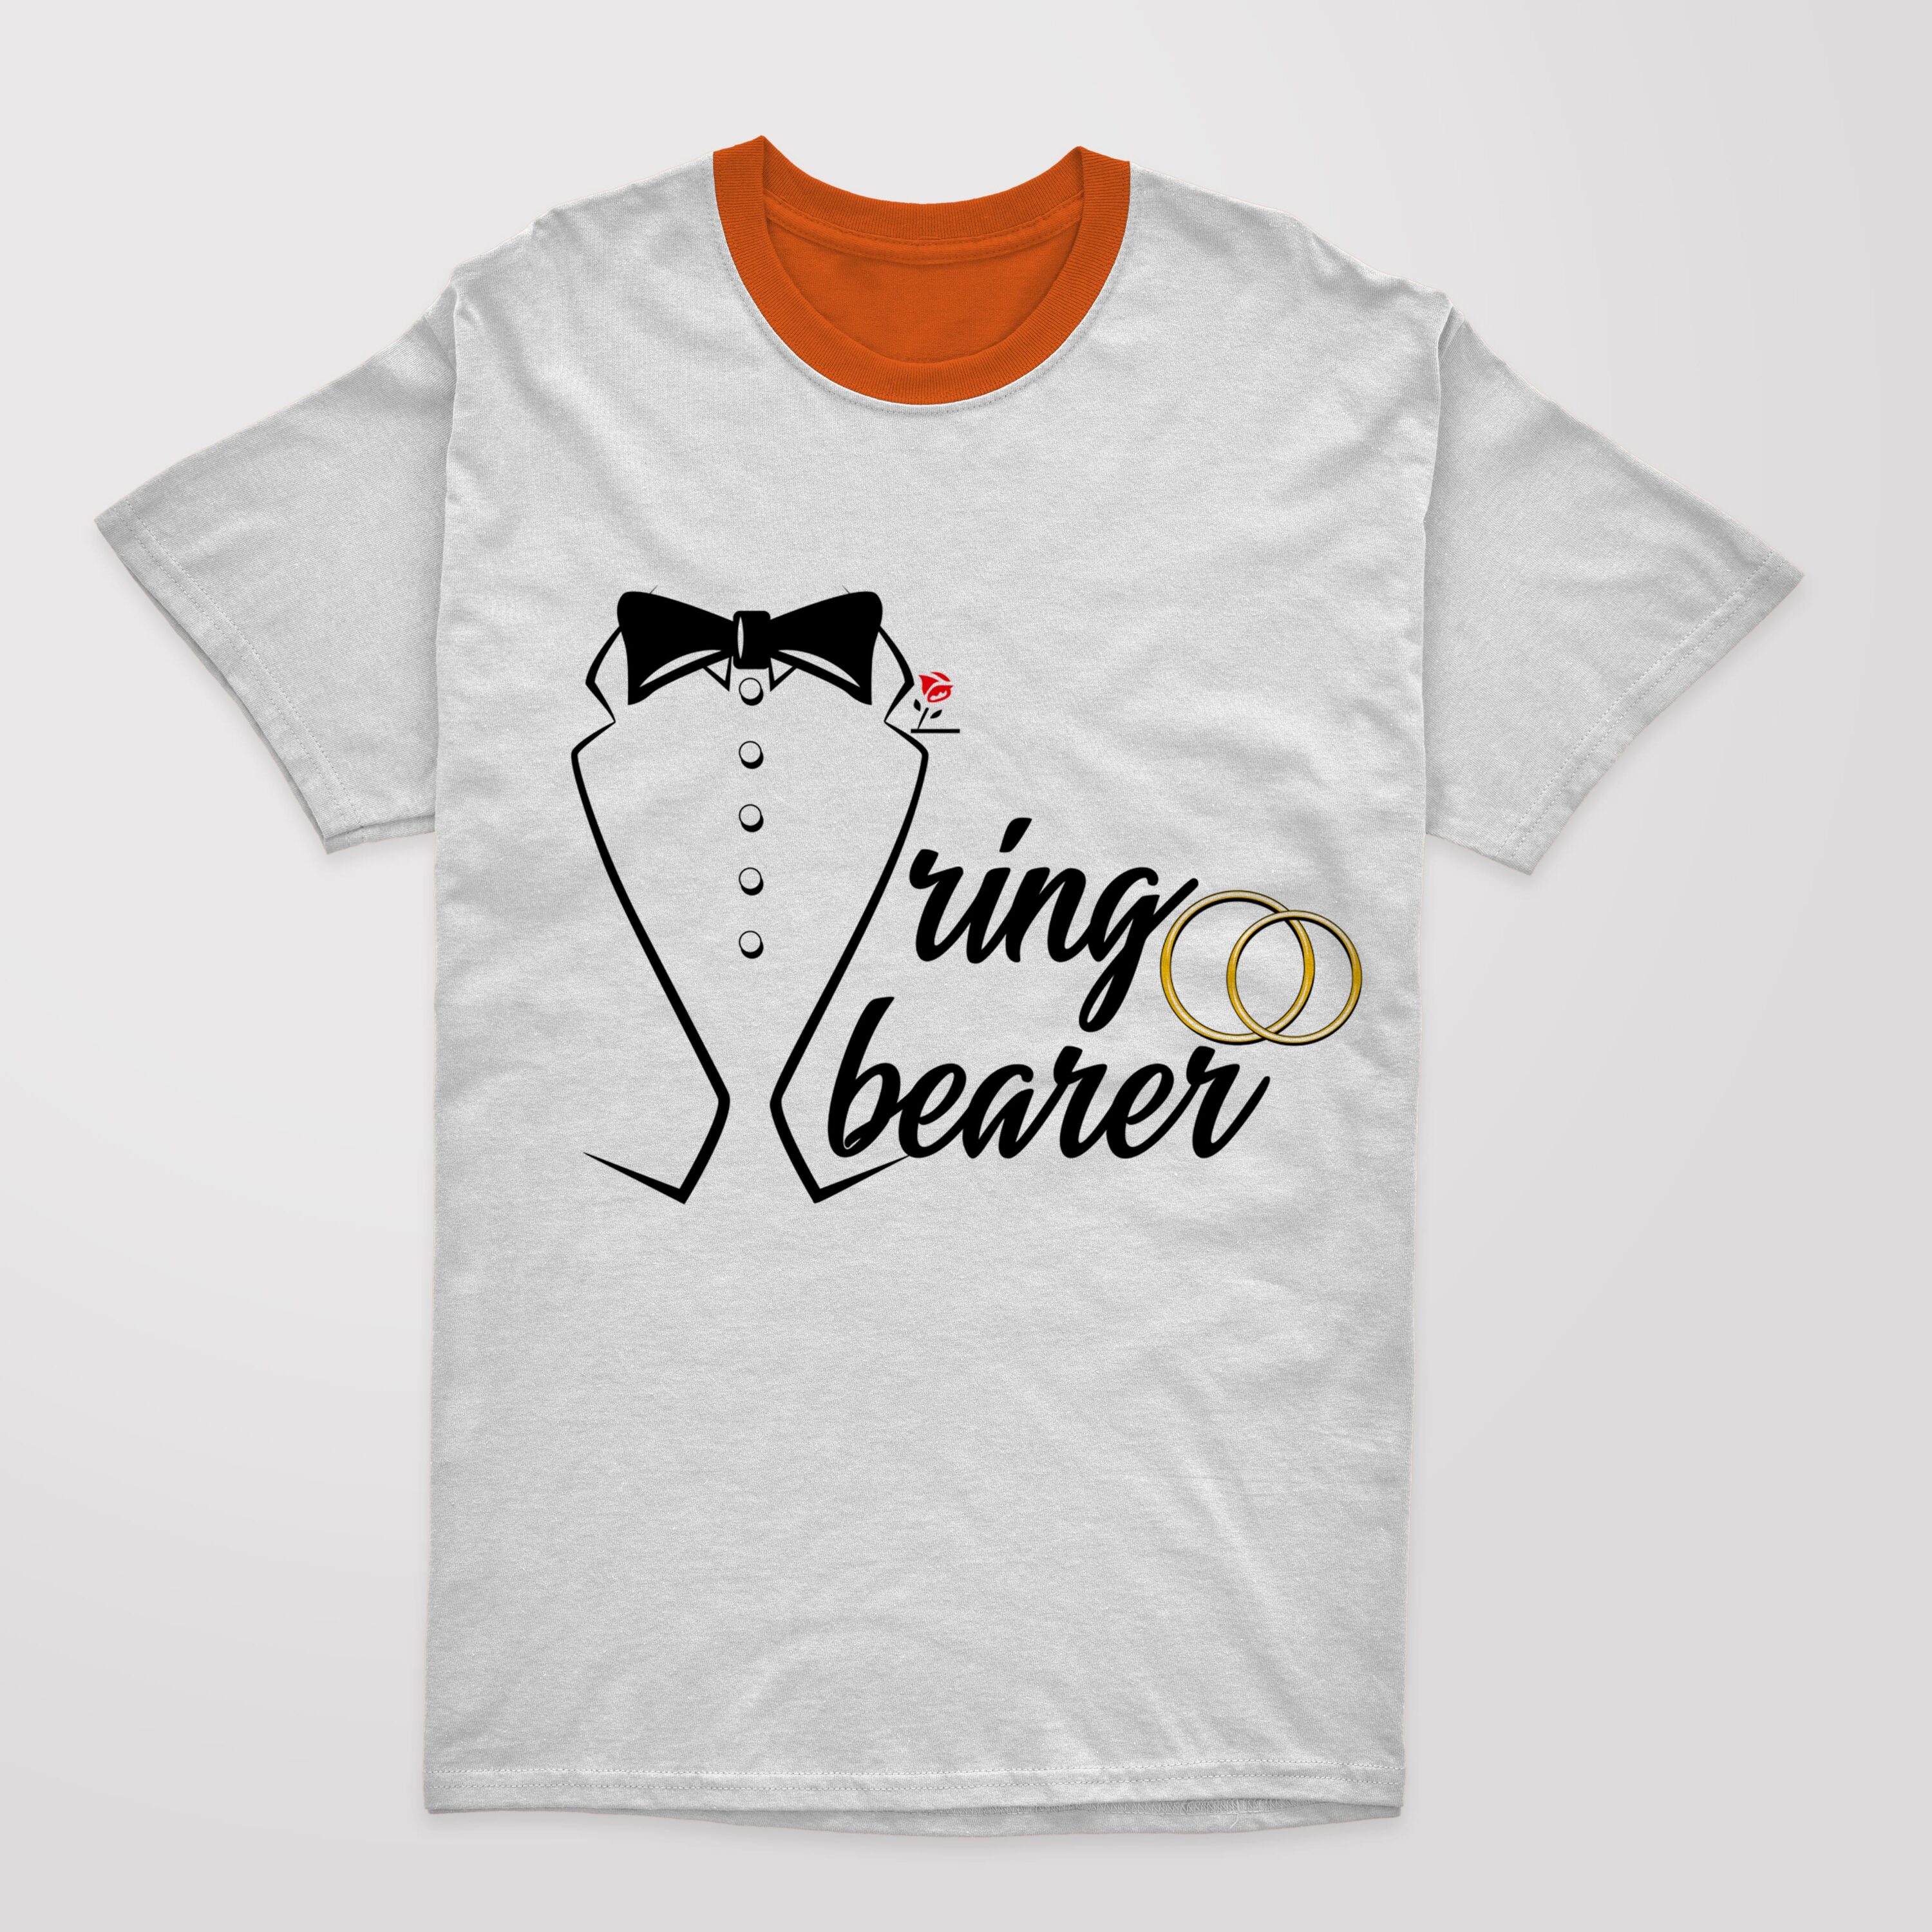 T-shirt image with beautiful print of tuxedo and wedding rings.